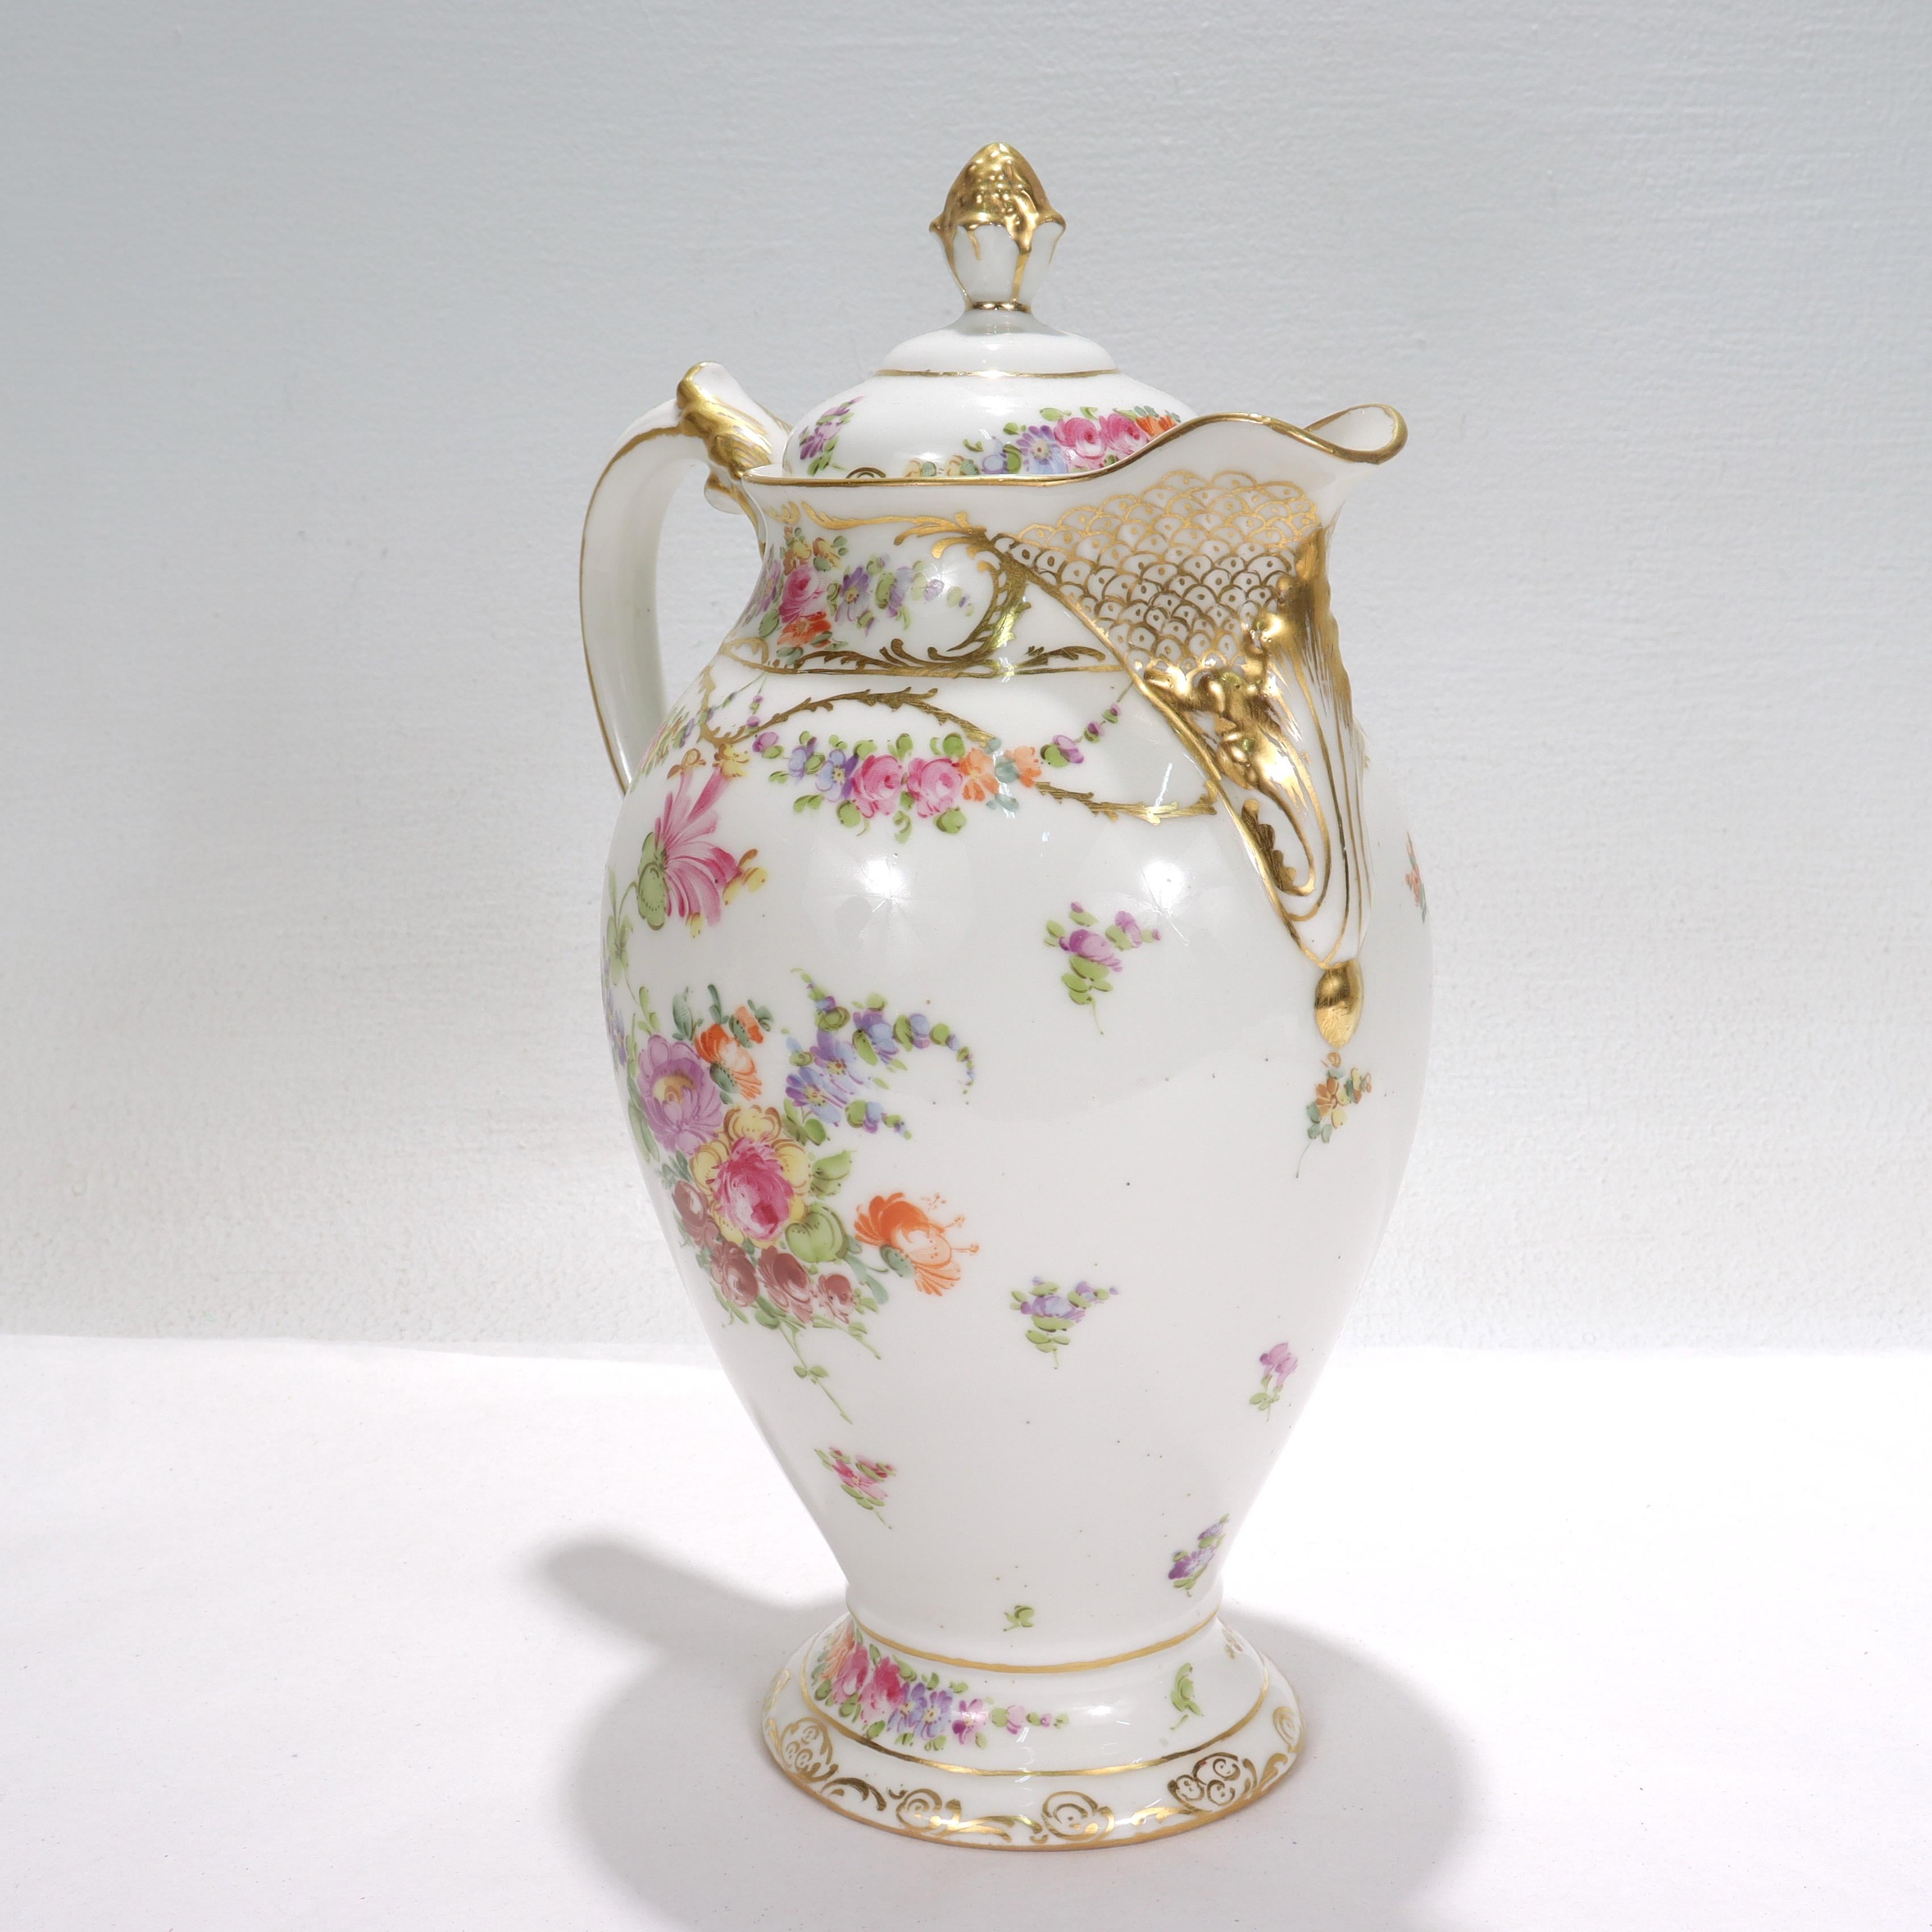 20th Century Antique Limoges Dresden Porcelain Chocolate Pot with Handpainted Flowers